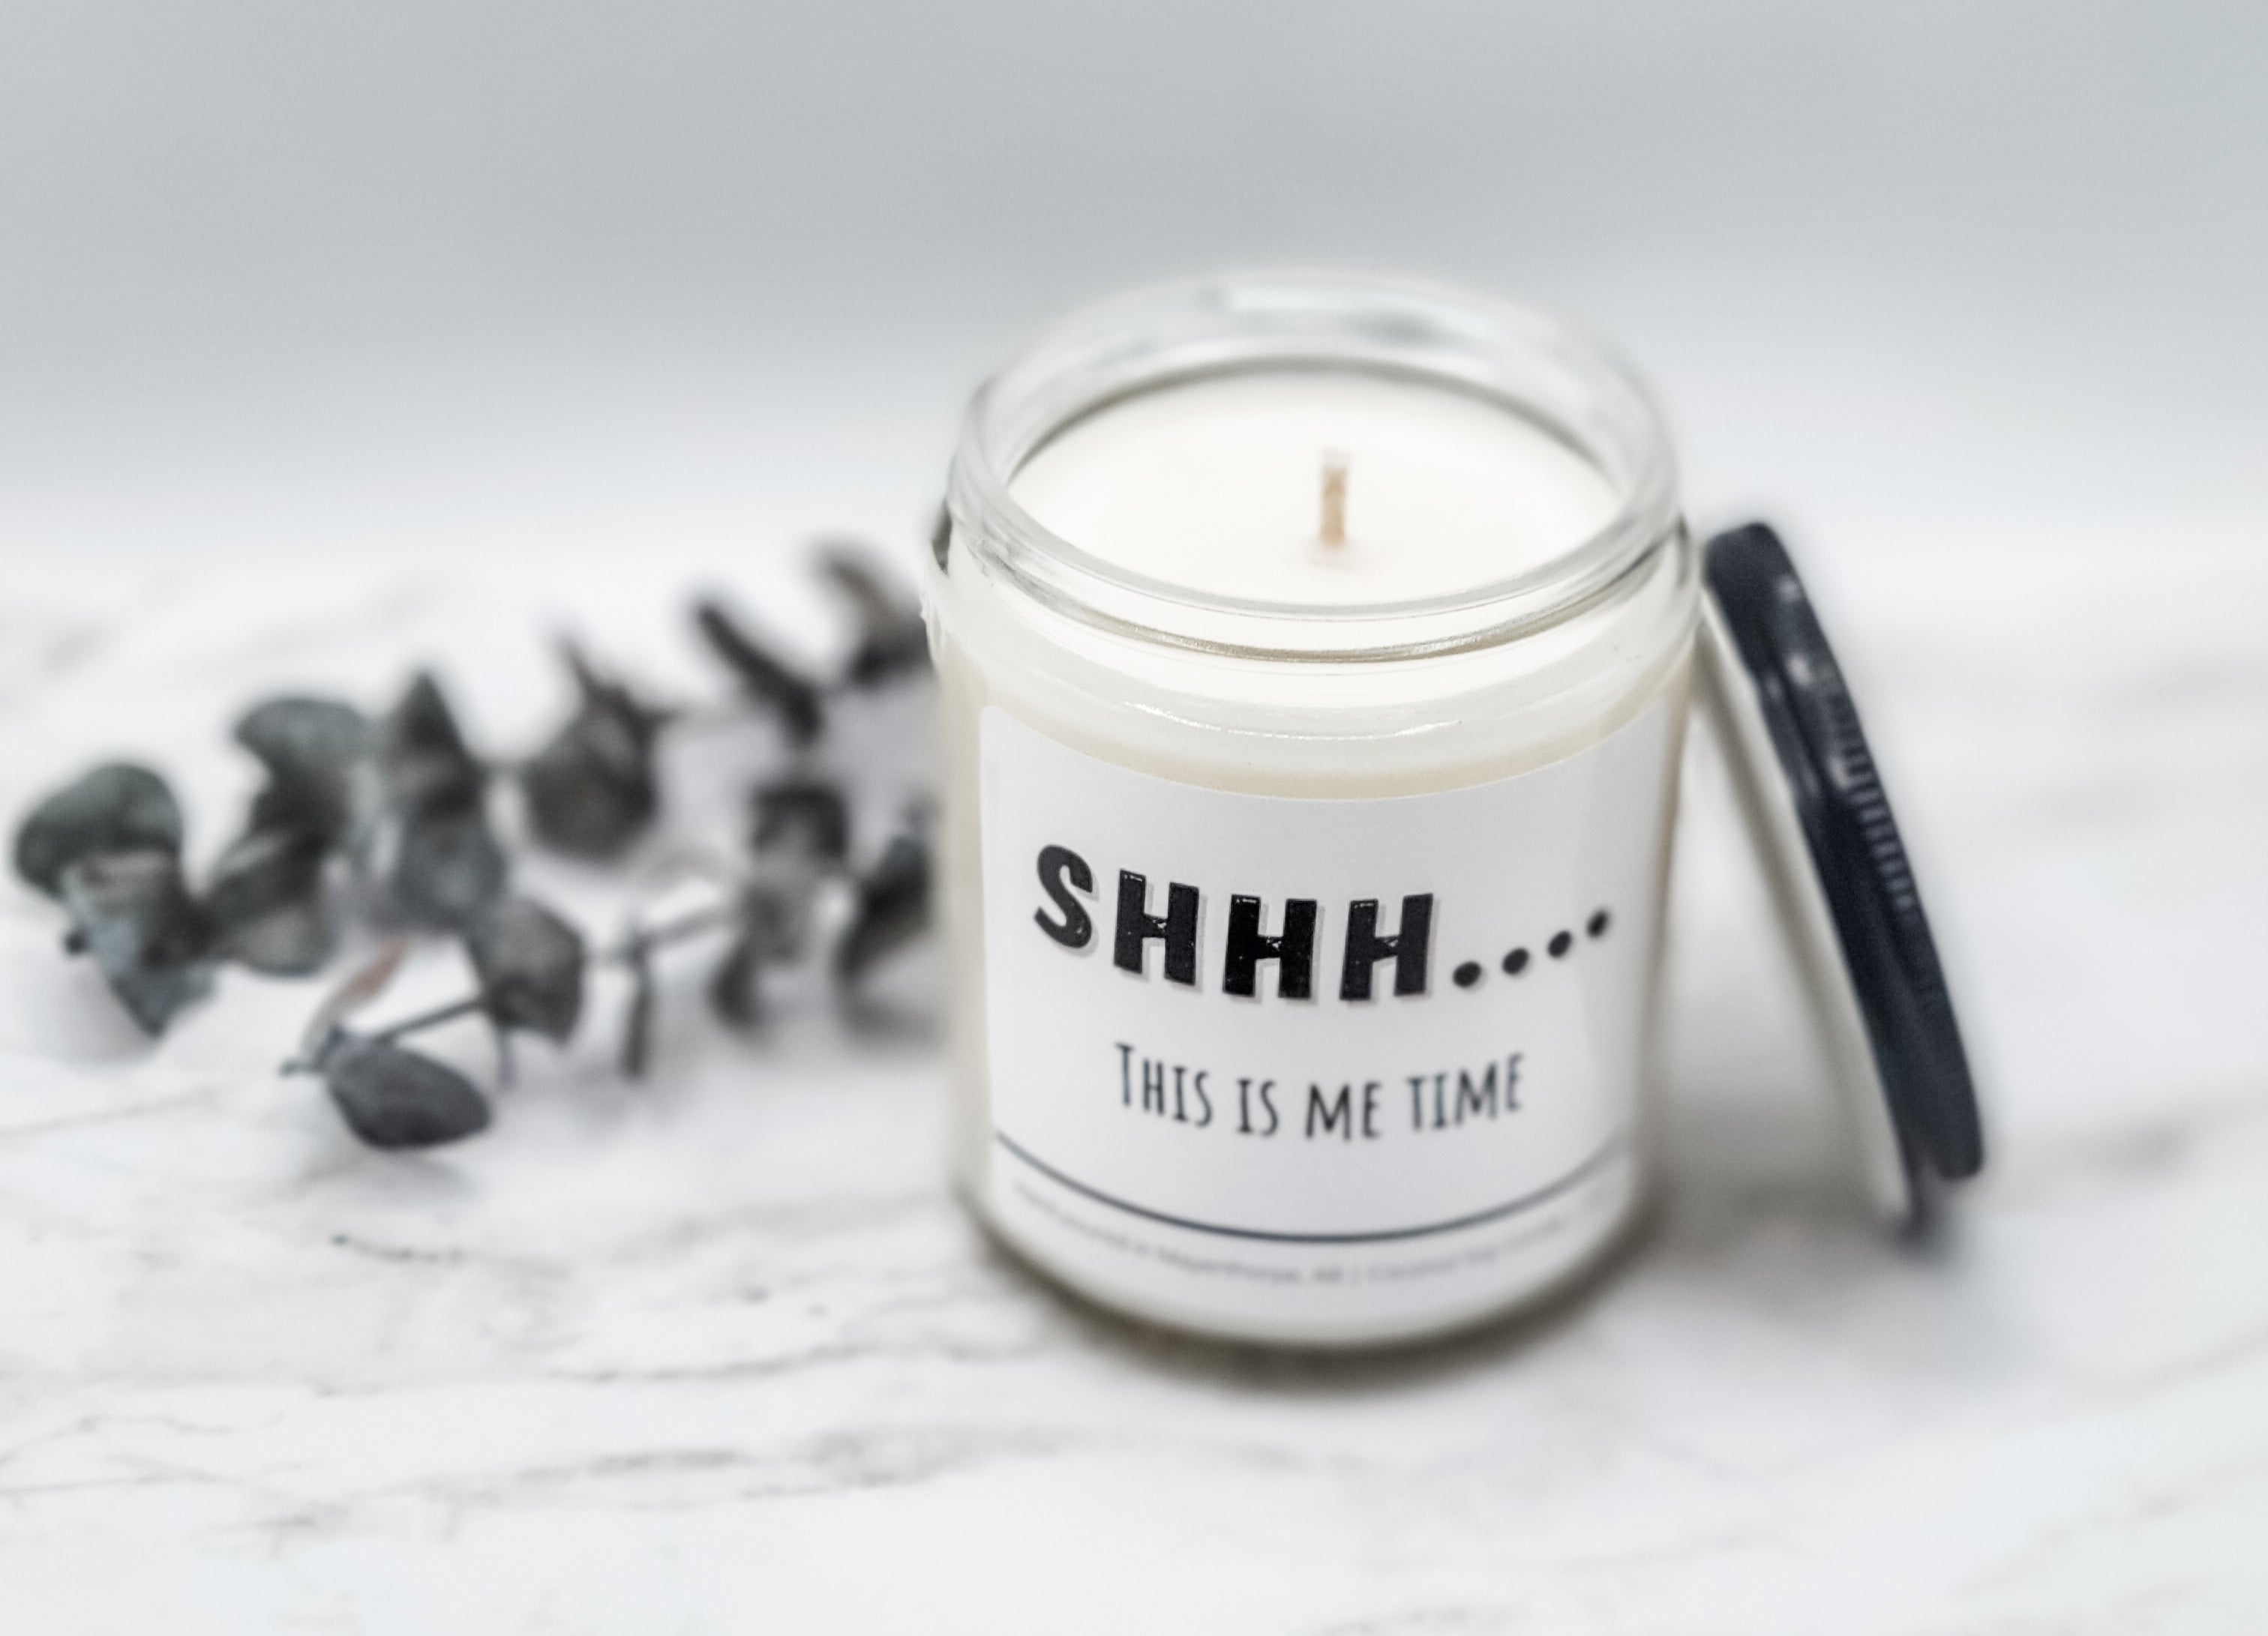 Shhh....this is ME time - Naughty Candle